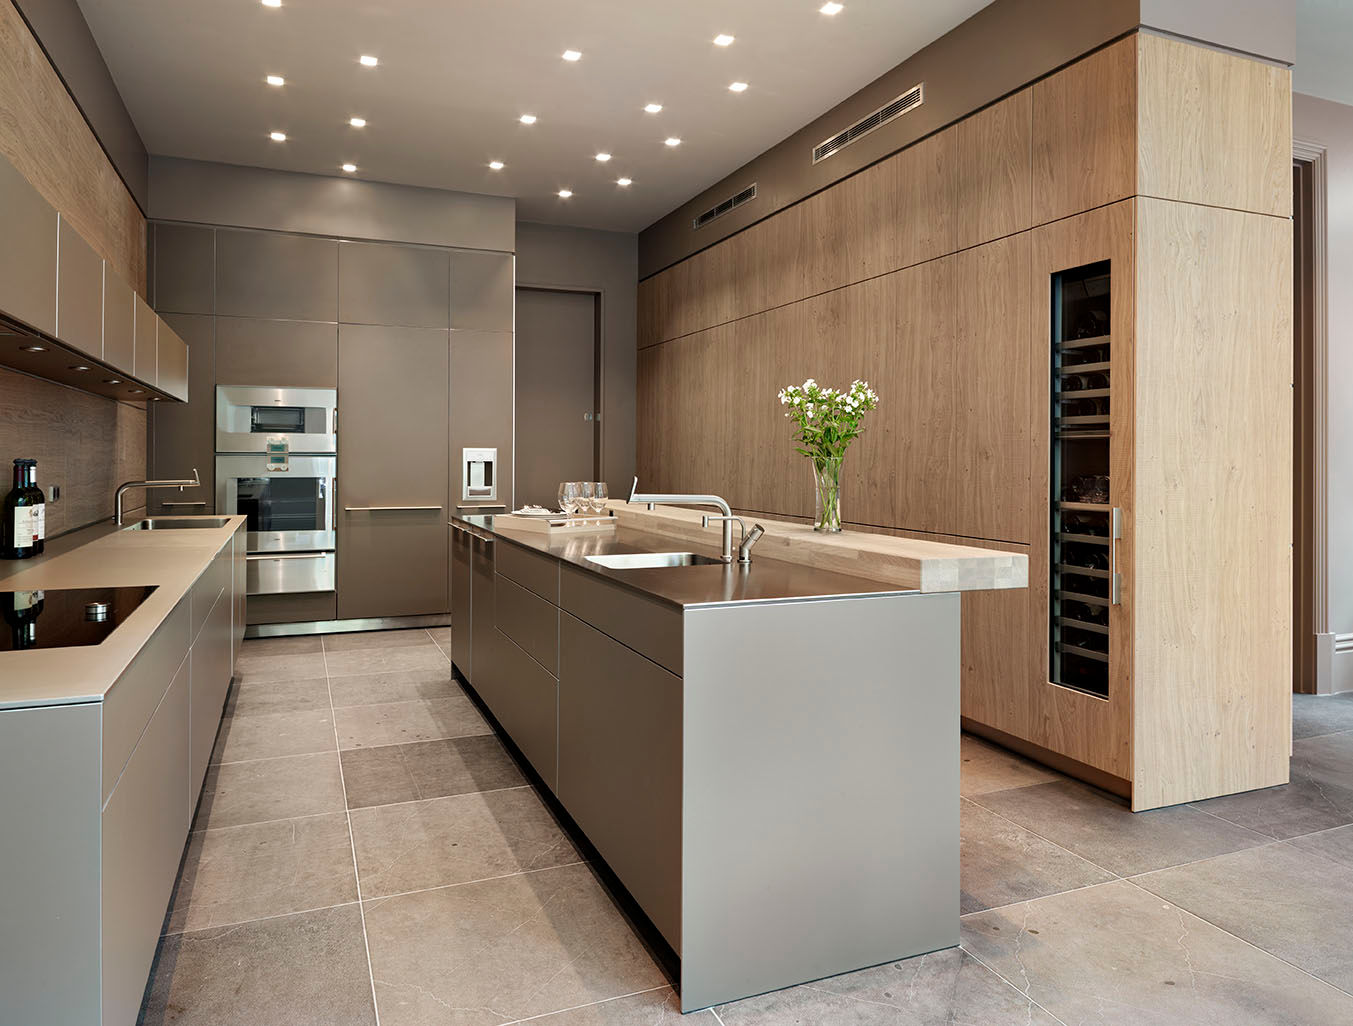 Grand dining Kitchen Architecture Cocinas de estilo moderno kitchen architecture,bulthaup,bulthaup b3,bespoke kitchen,contemporary kitchen,kitchen island,breakfast bar,integrated kitchen,integrated appliance,wine cooler,gagganau,sociable living